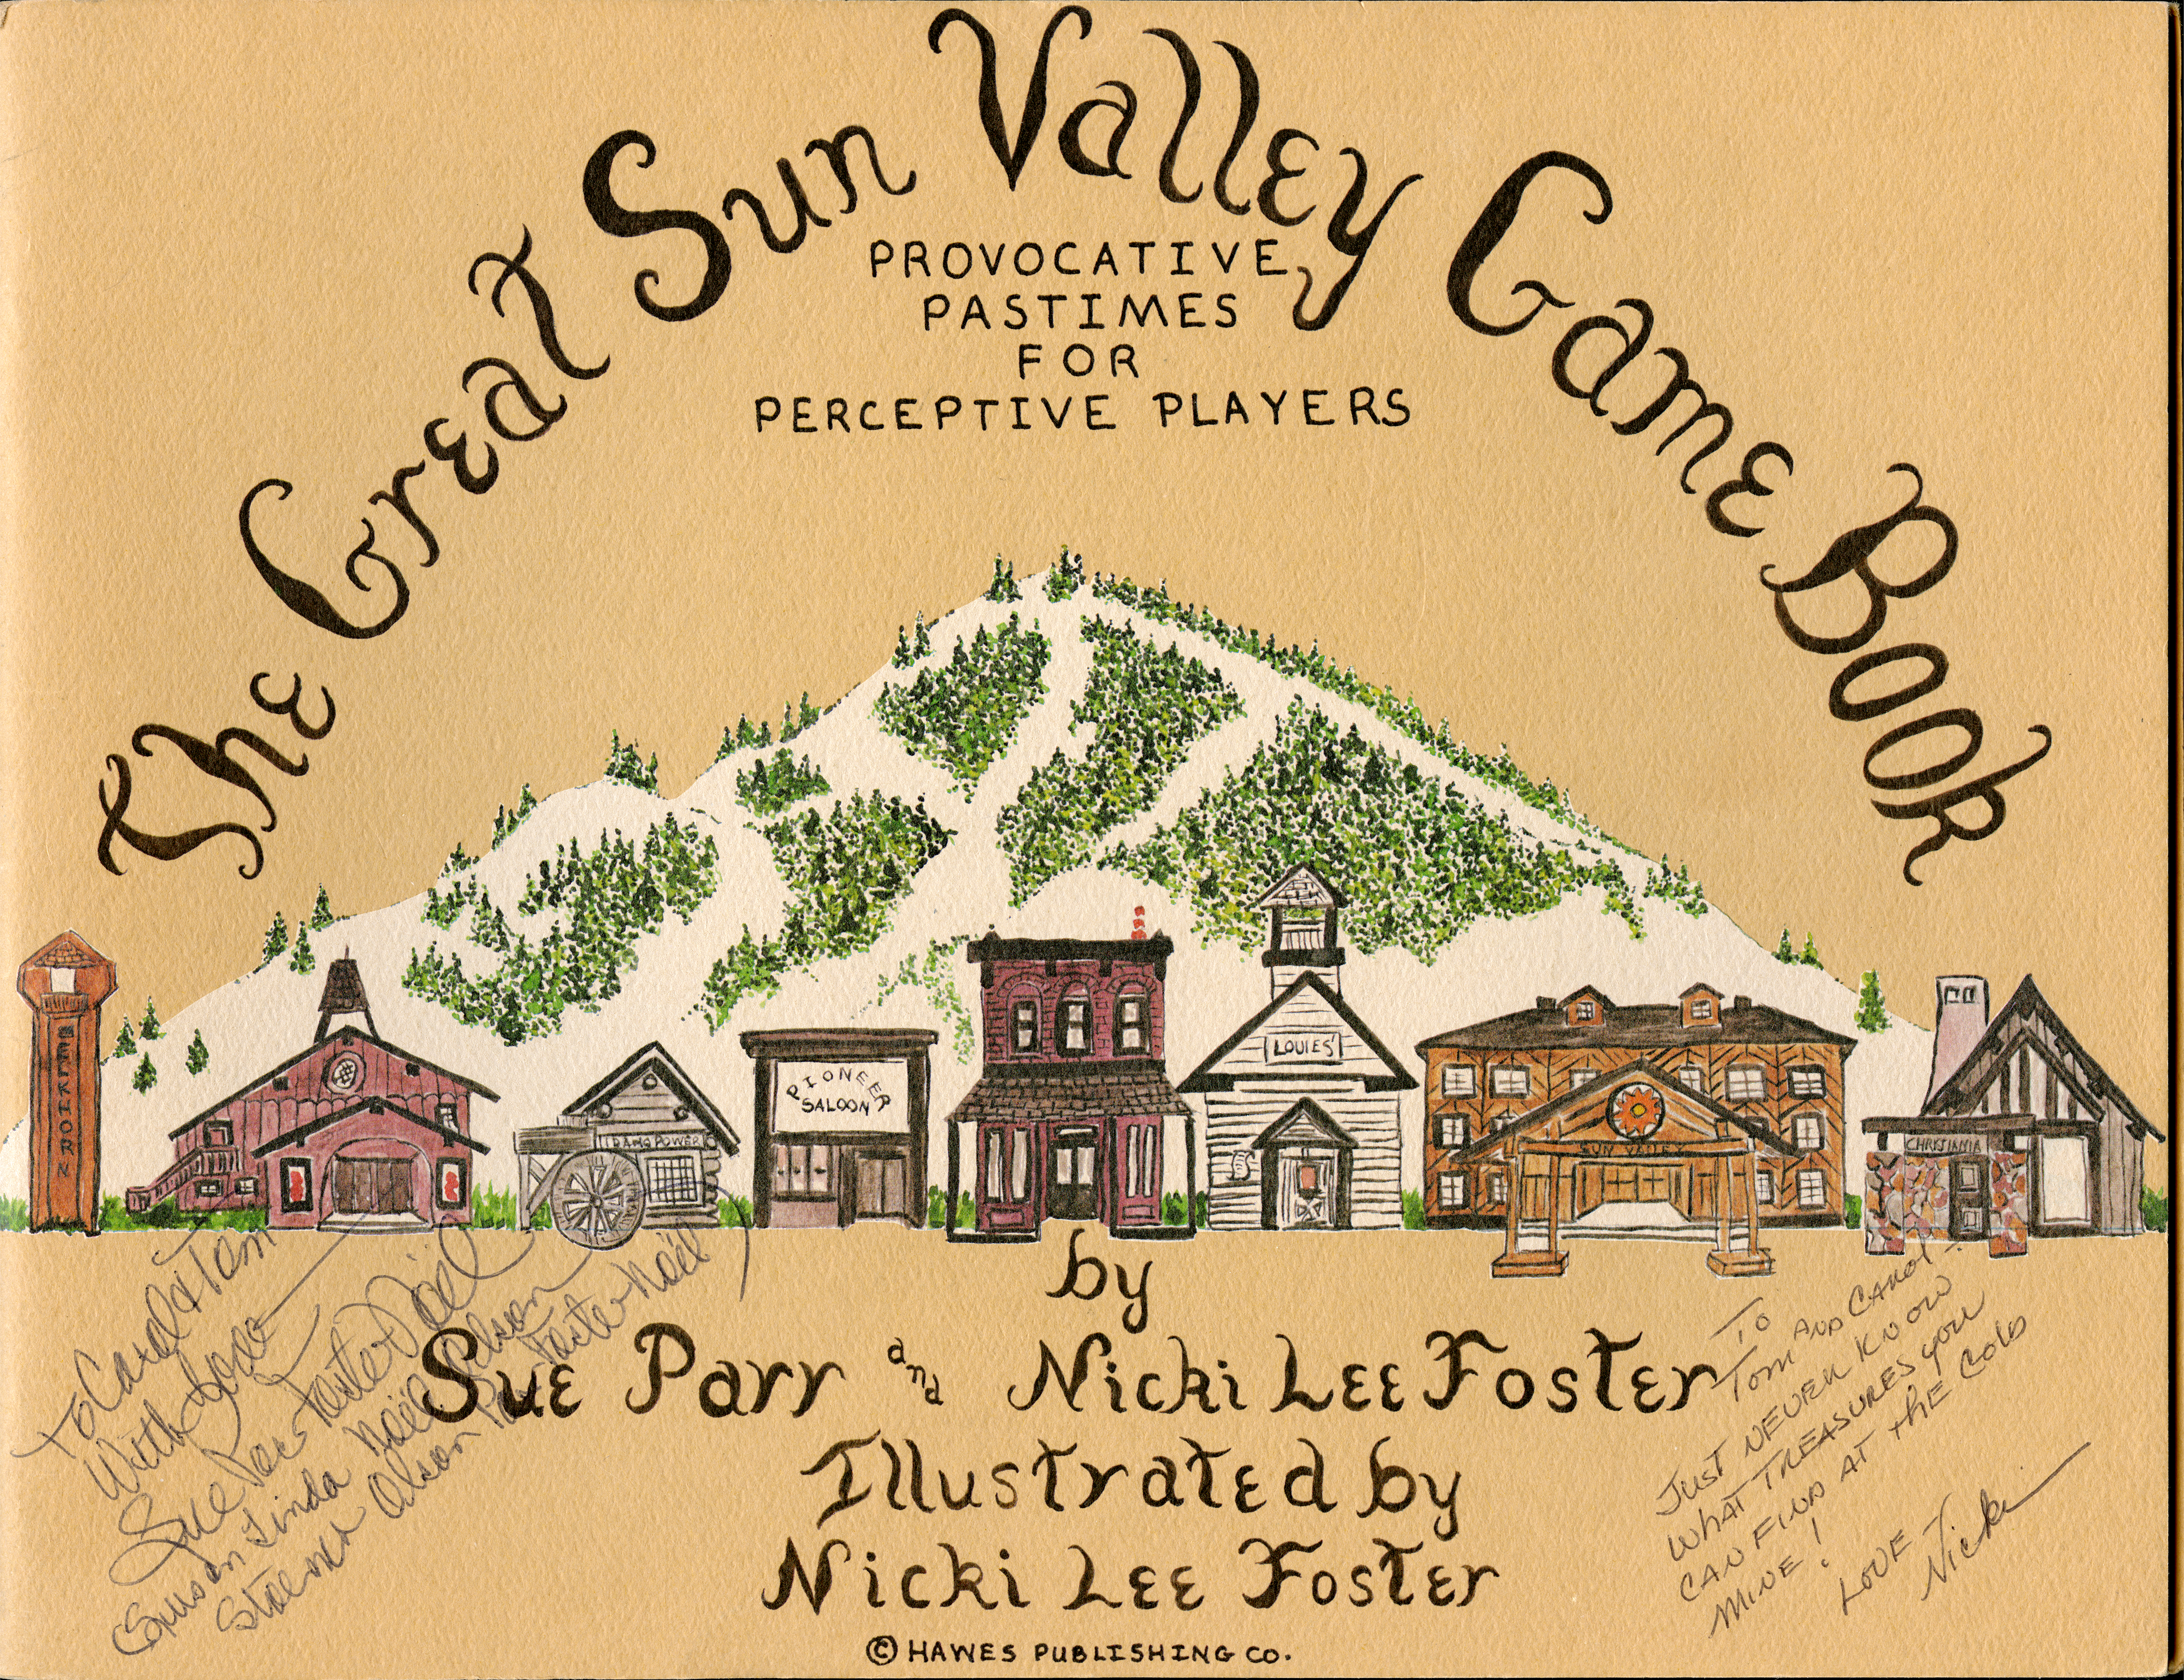 Cover of the Sun Valley Game Book, depicting various buildings and Bald Mountain